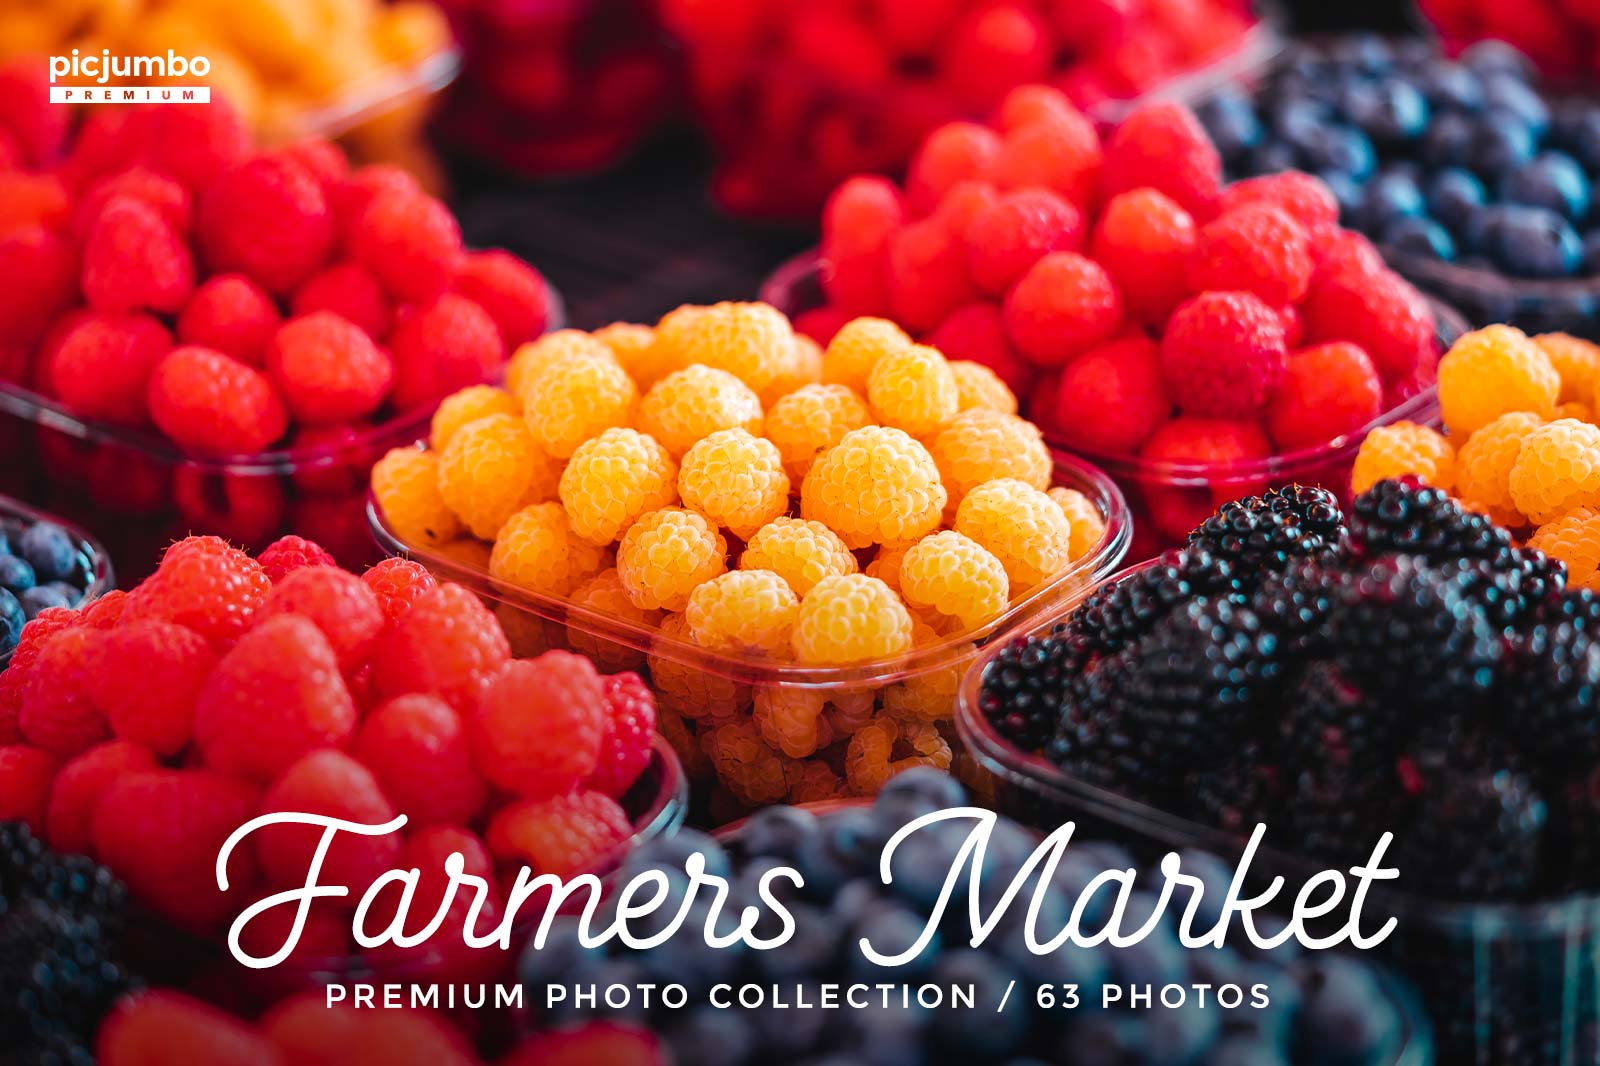 Download hi-res stock photos from our Farmers Market PREMIUM Collection!